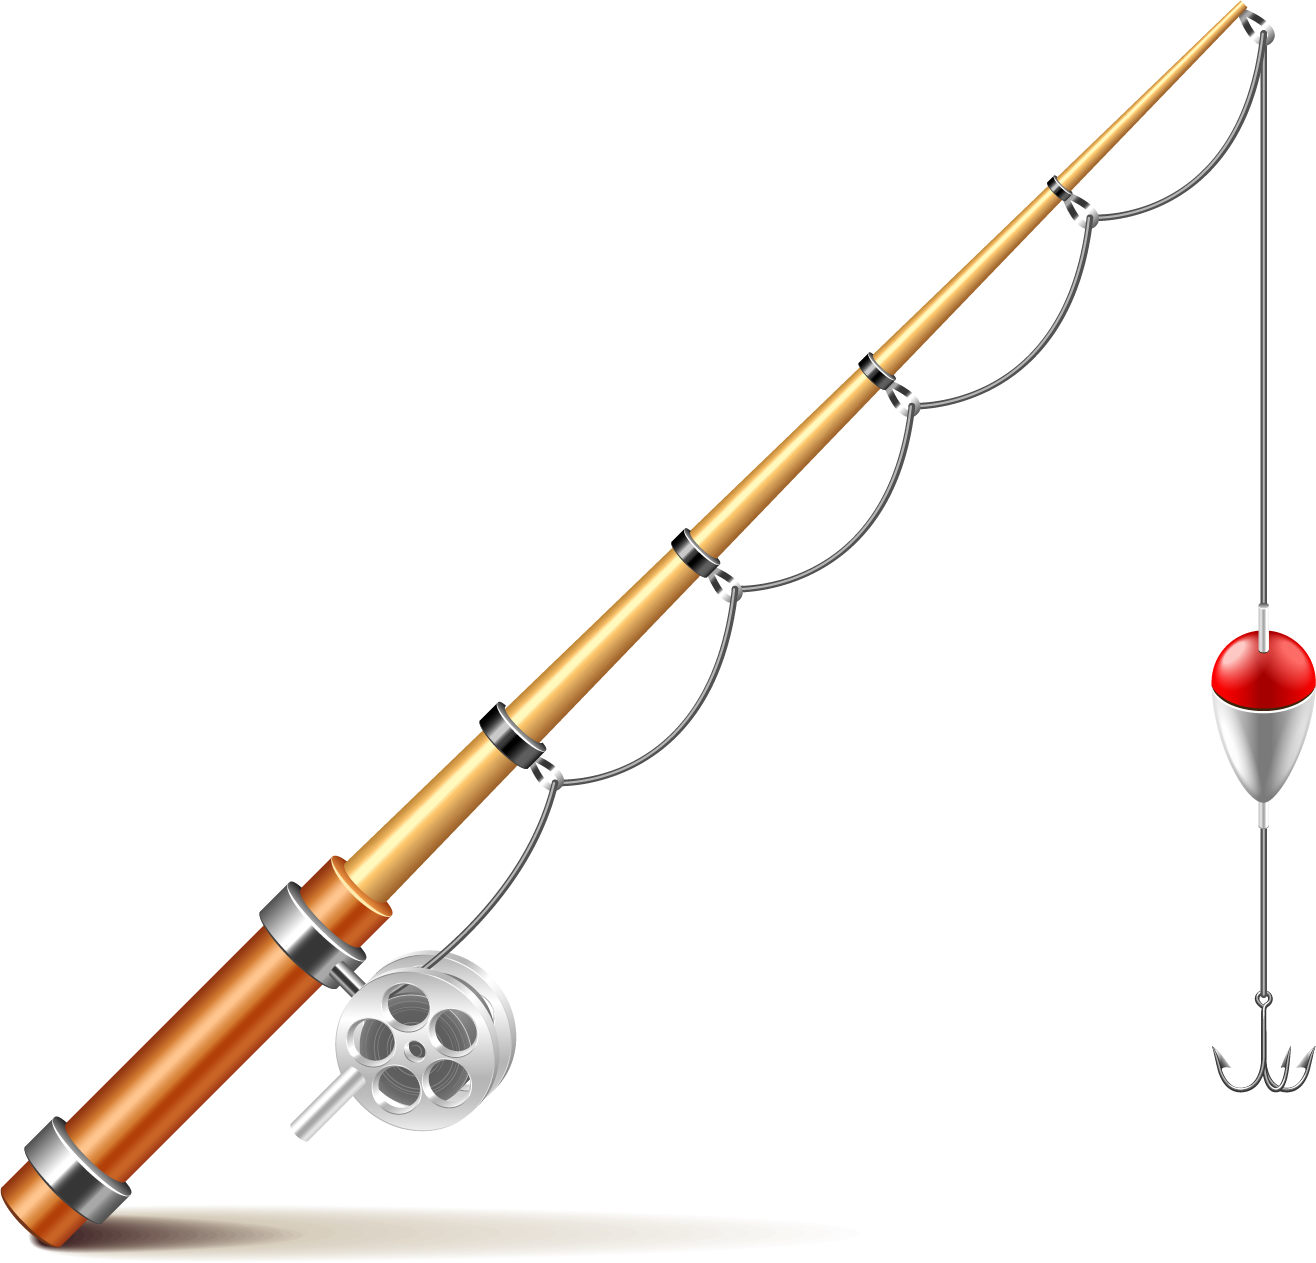 Fishing Rod Vector Free Download at GetDrawings Free download